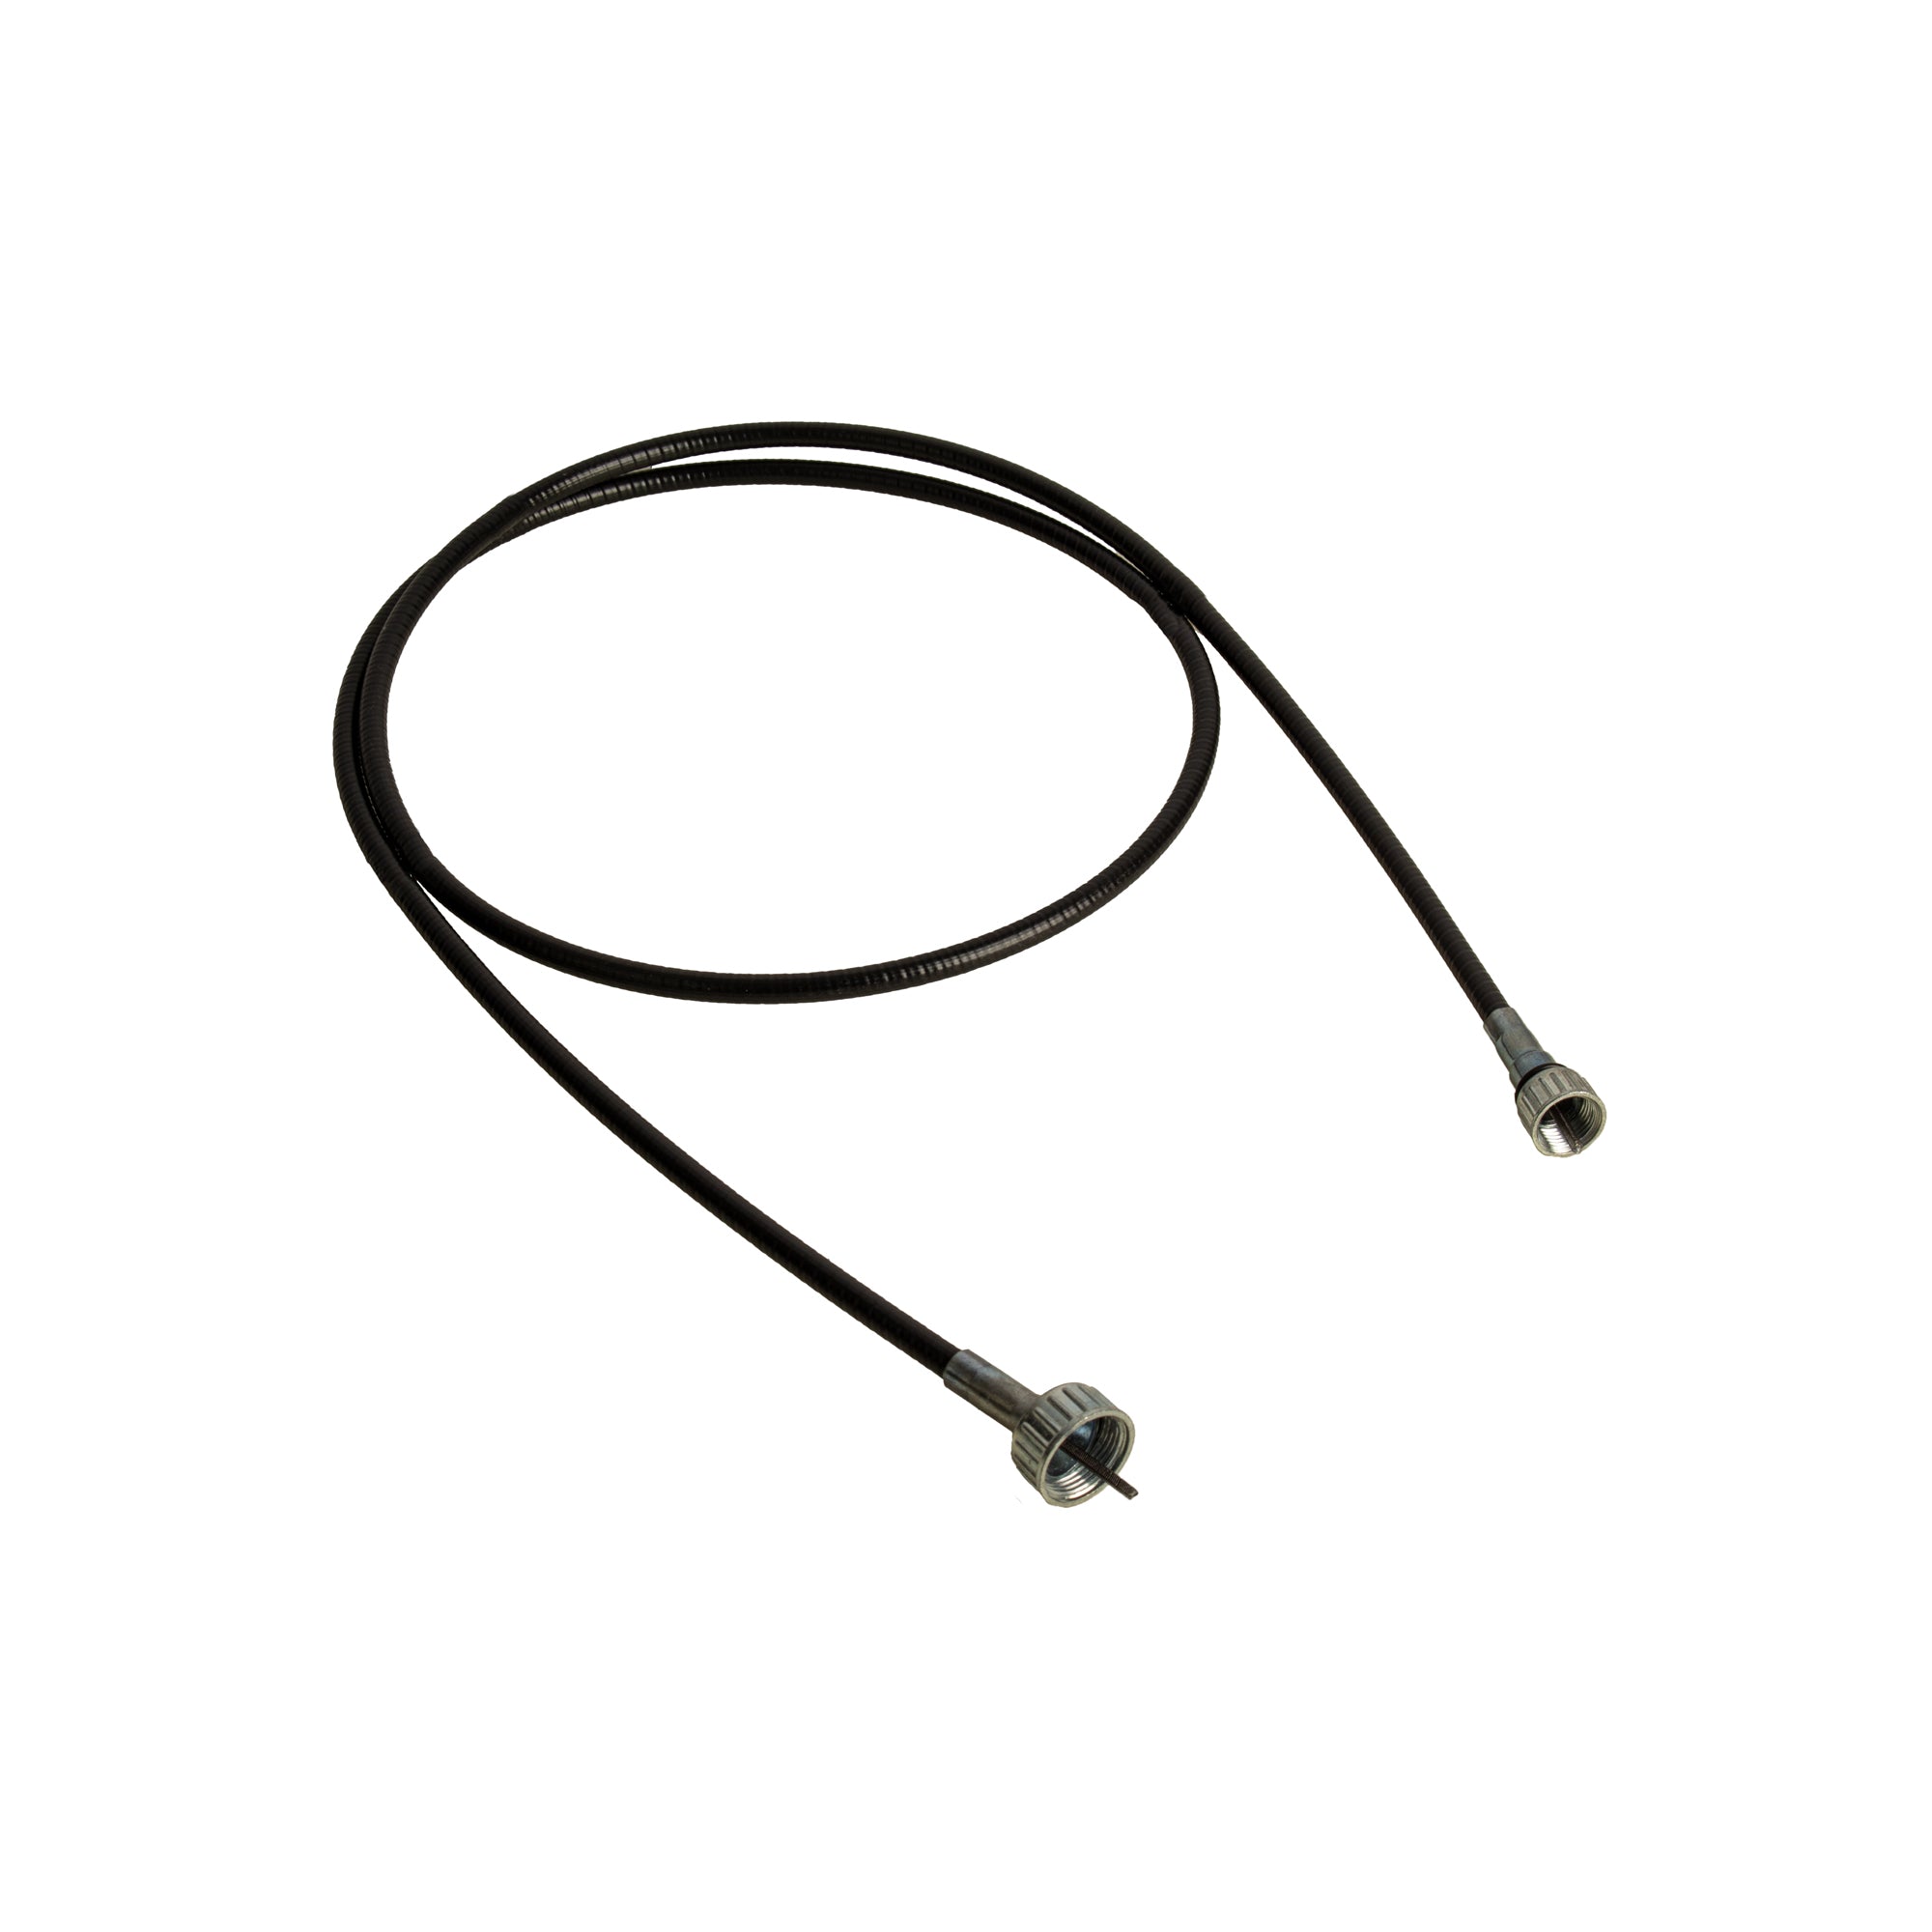 Tachometer Cable Replacement for CASE IH 595 695 895 995 3230 4210 1500716C1